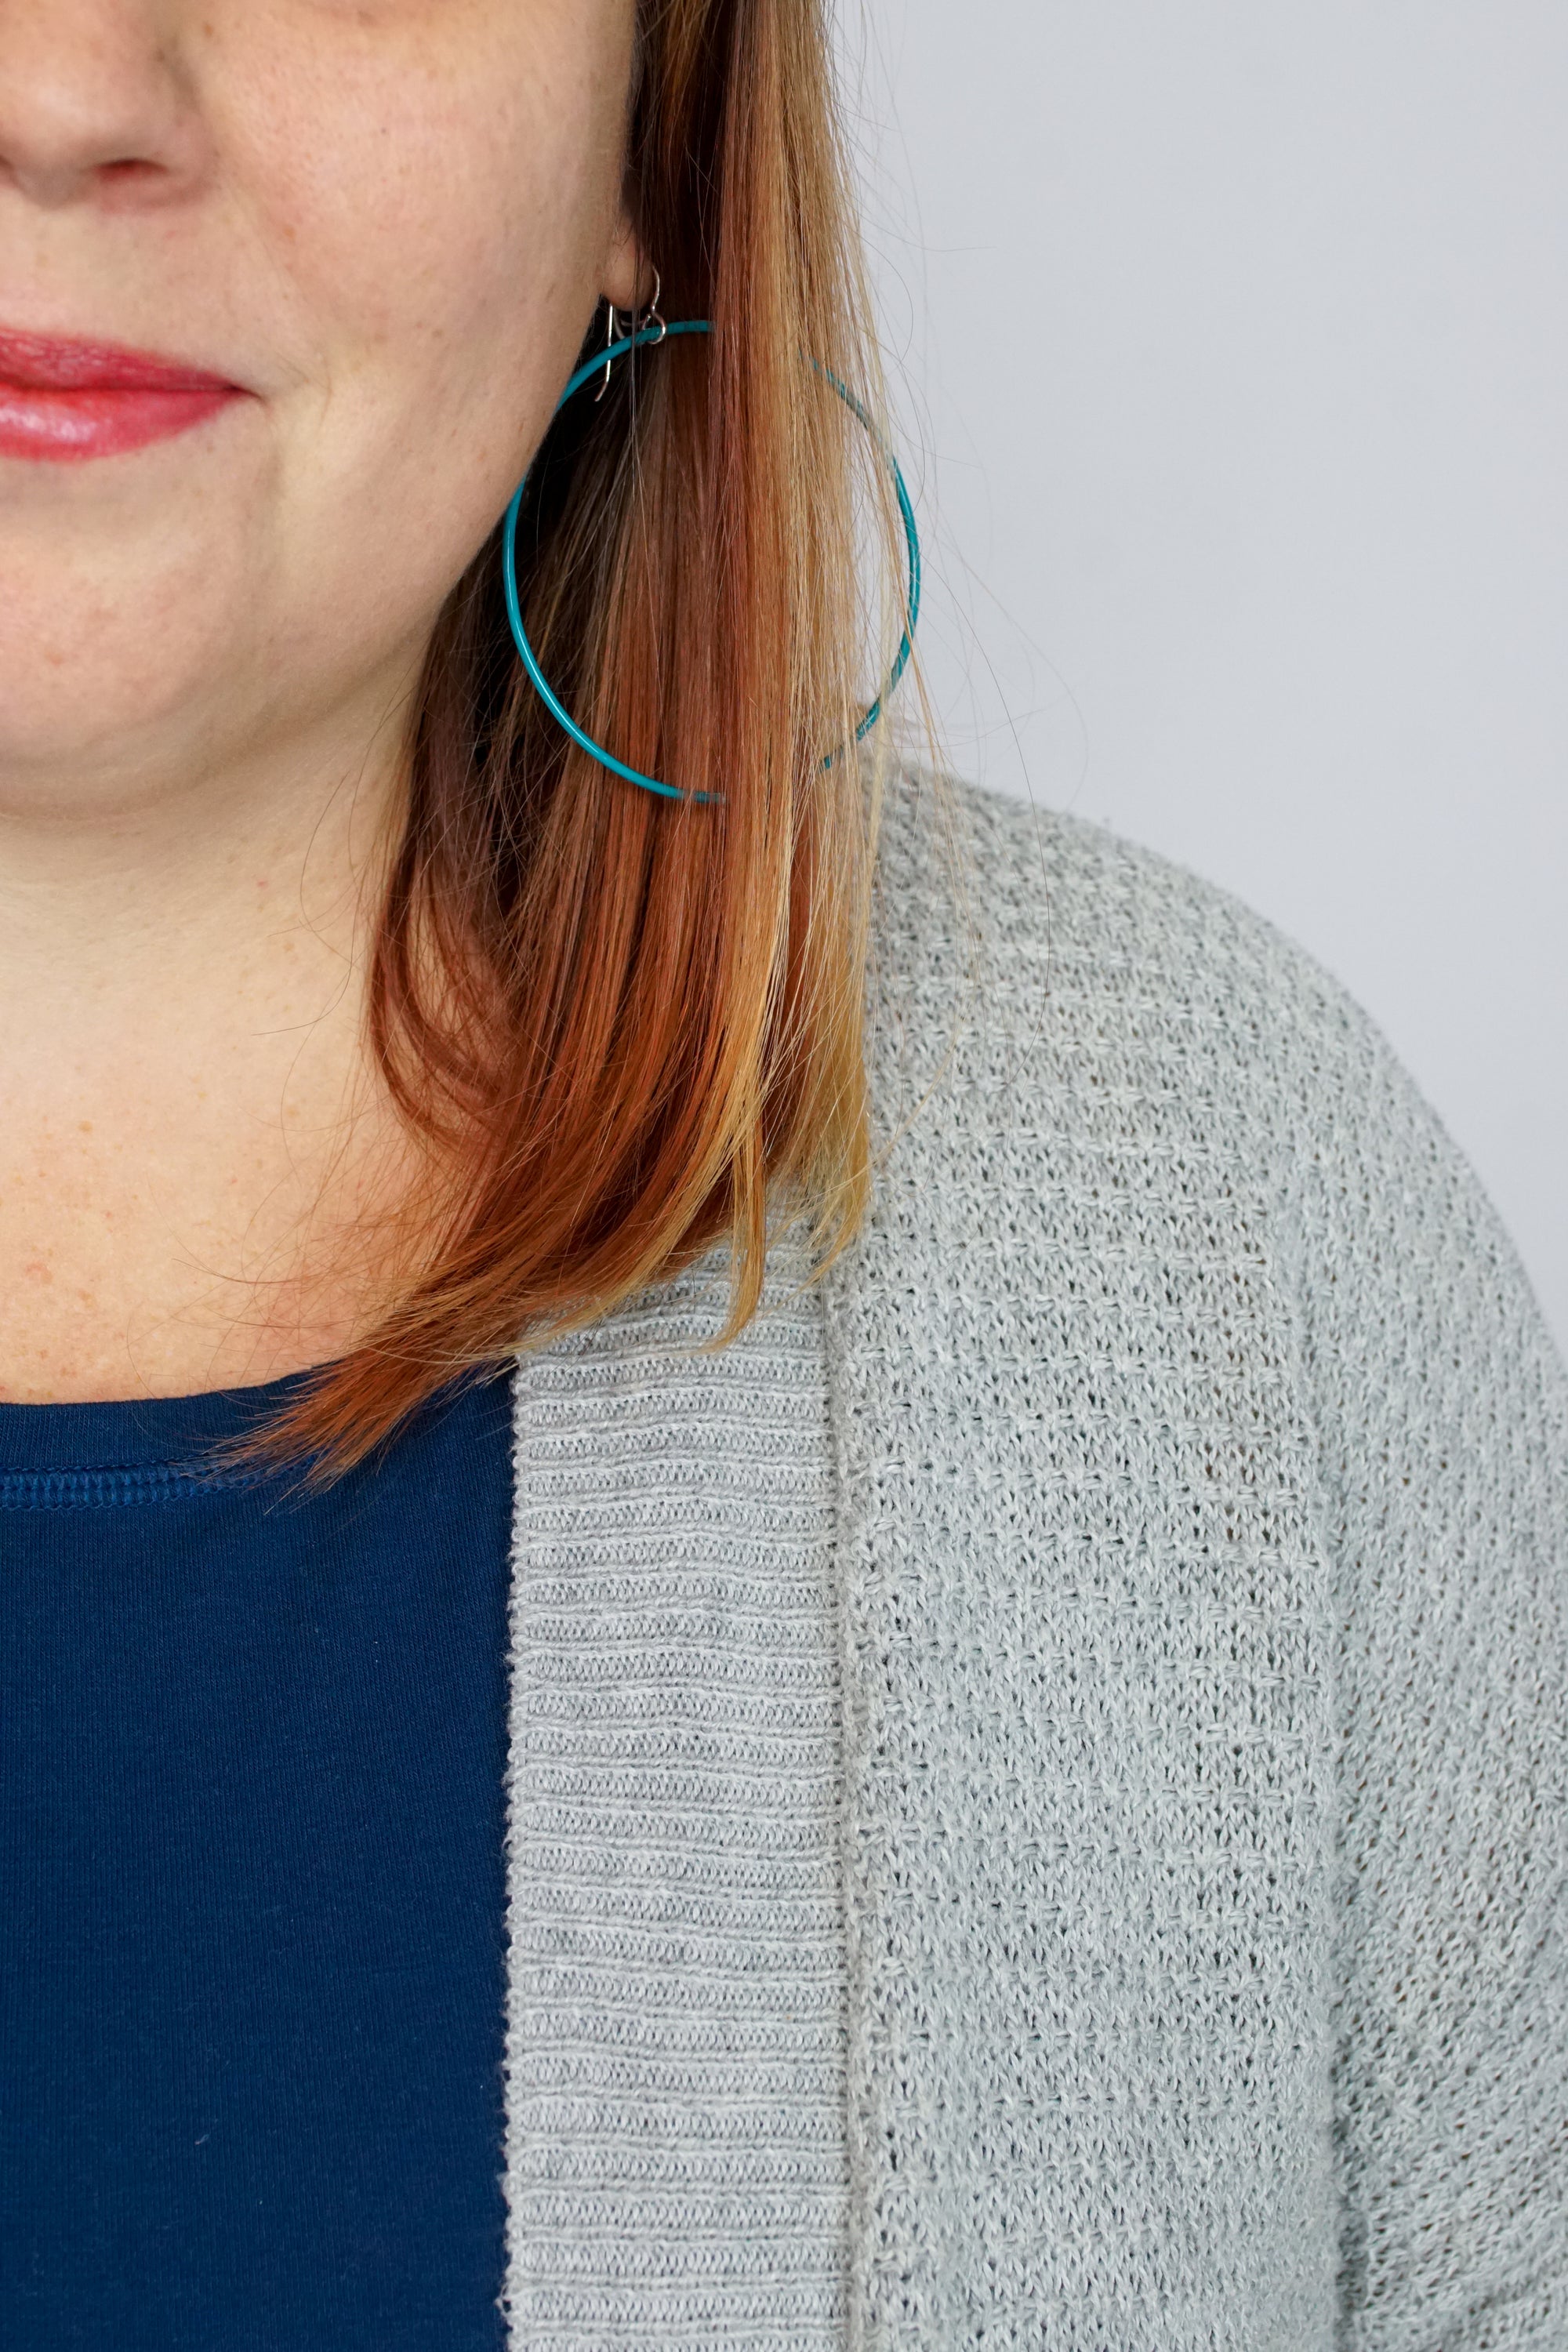 Extra Large Evident Earrings in Bold Teal